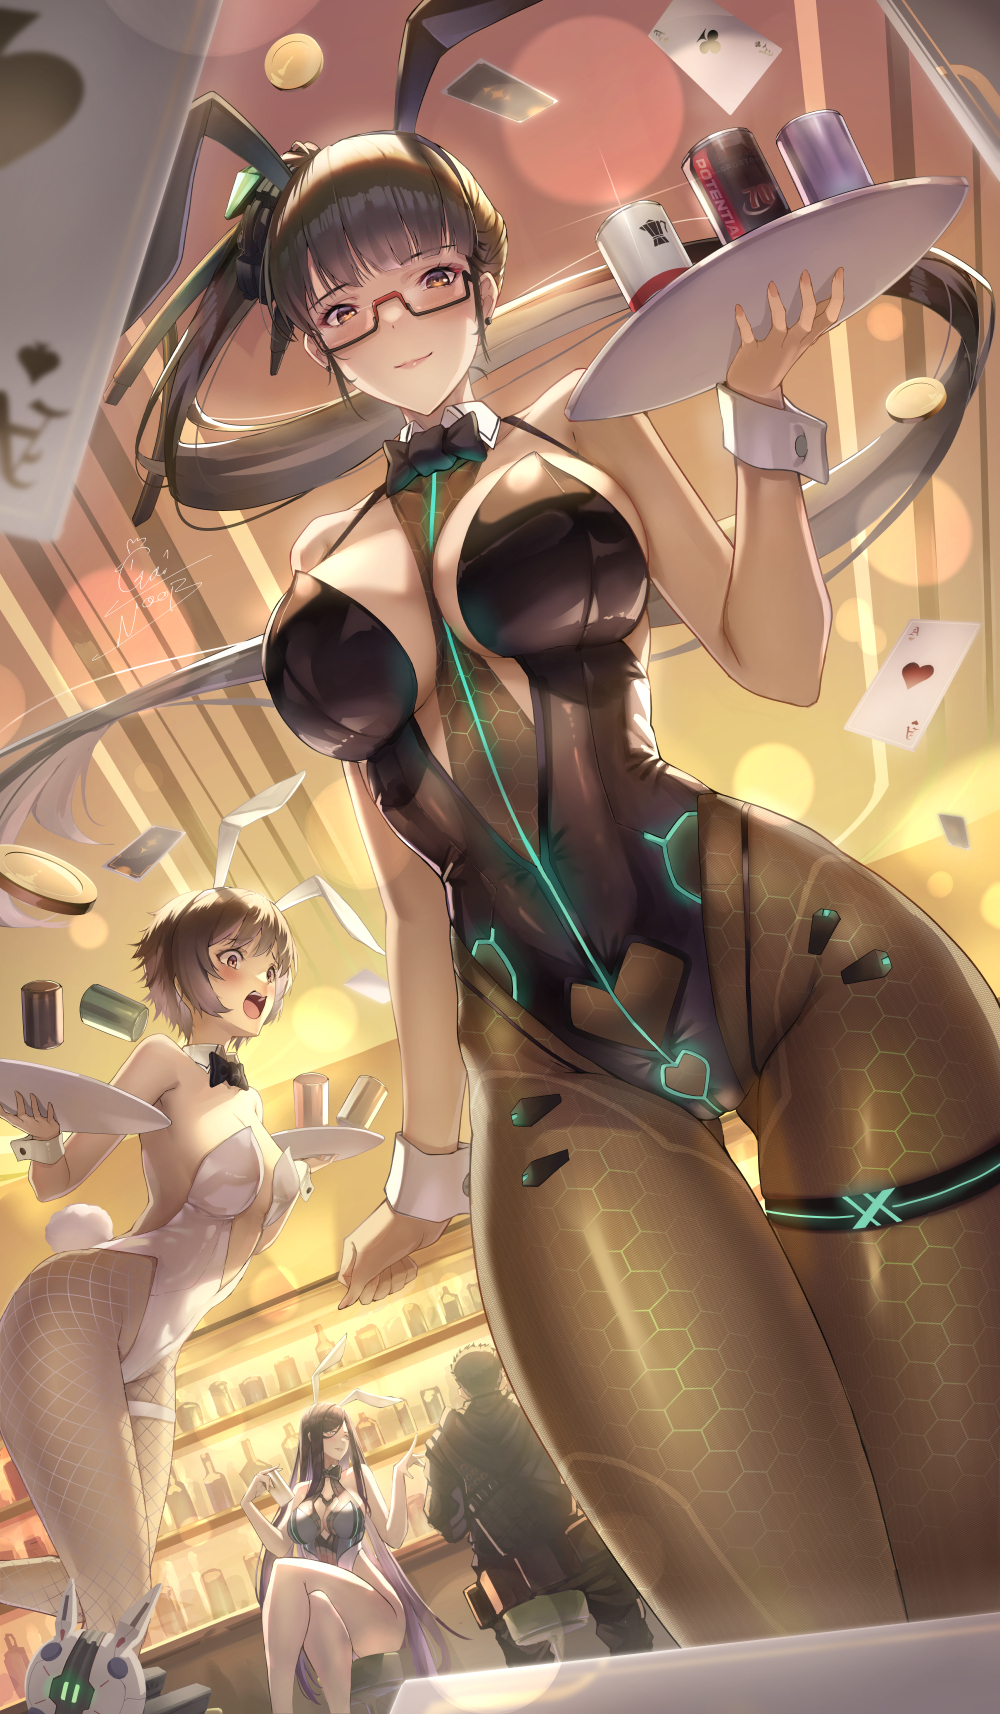 Anime 1000x1714 Stellar Blade bunny suit portrait display bunny girl Eve (Stellar Blade) bow tie Lily (Stellar Blade) fishnet Raven (Stellar Blade) cards looking at viewer leotard glasses women indoors big boobs legs crossed fishnet pantyhose tail pantyhose thigh strap GaiNoob bunny ears bunny tail gold coins bar can drink